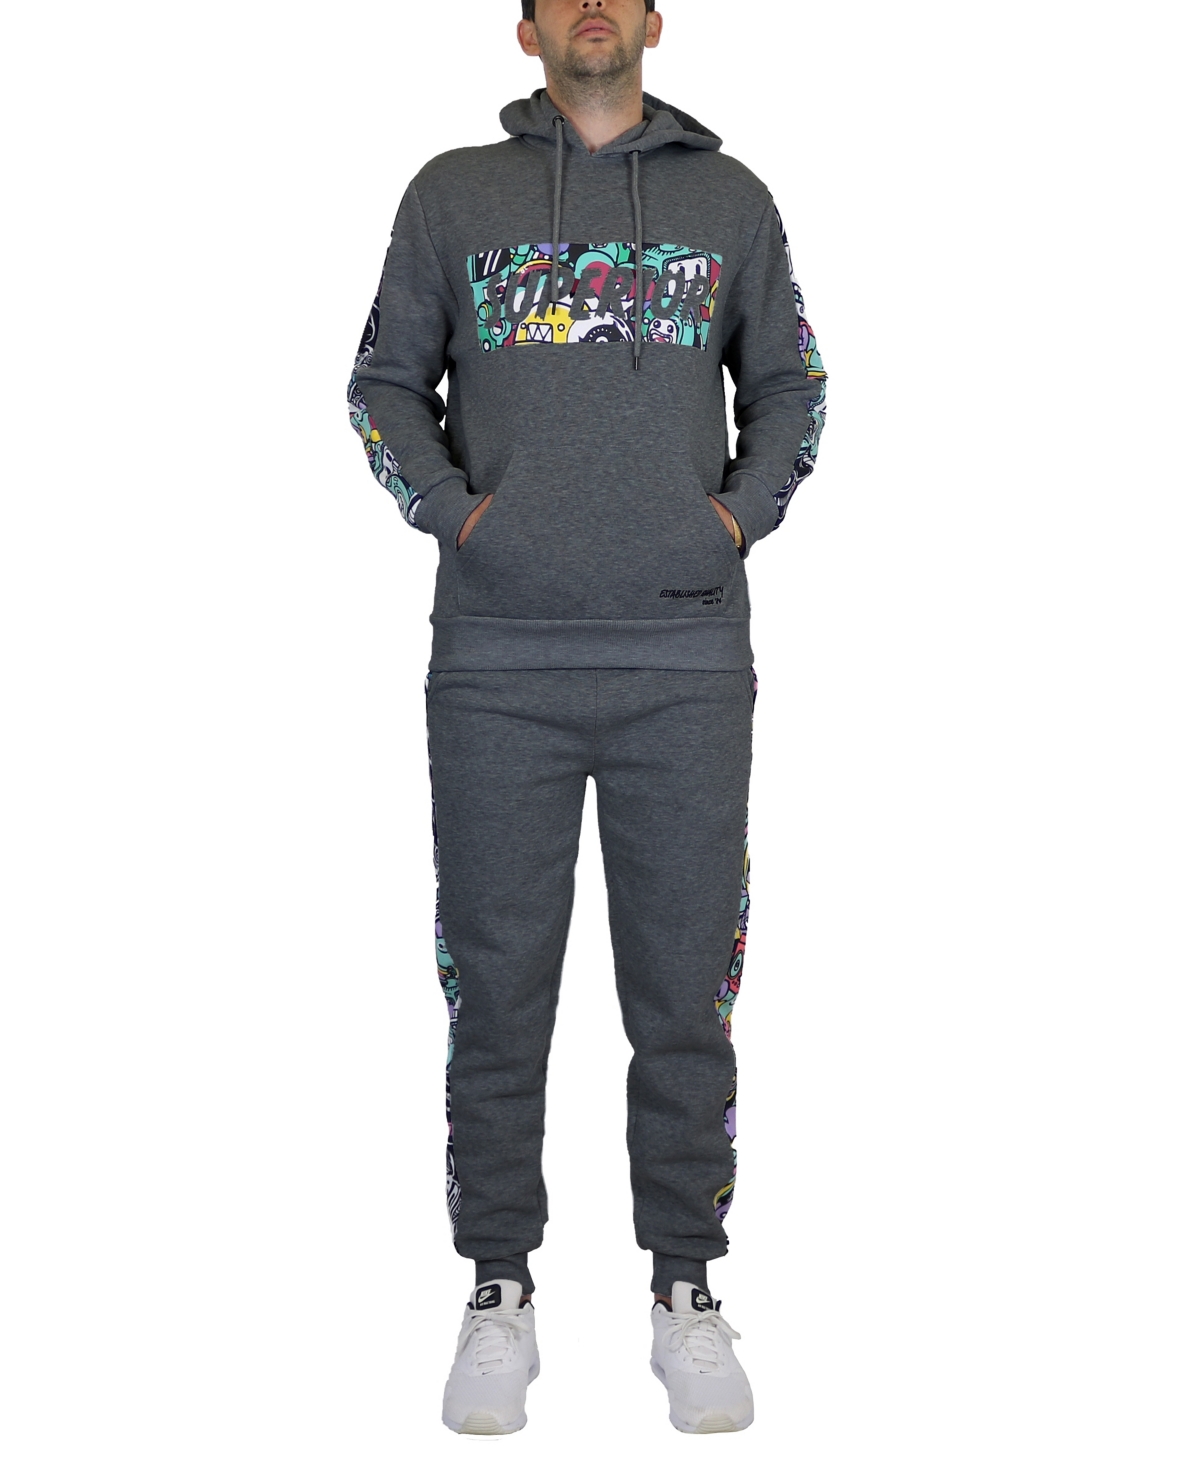 Men's Fleece-Lined Pullover Hoodie and Jogger Sweatpants, 2 Piece Set - White